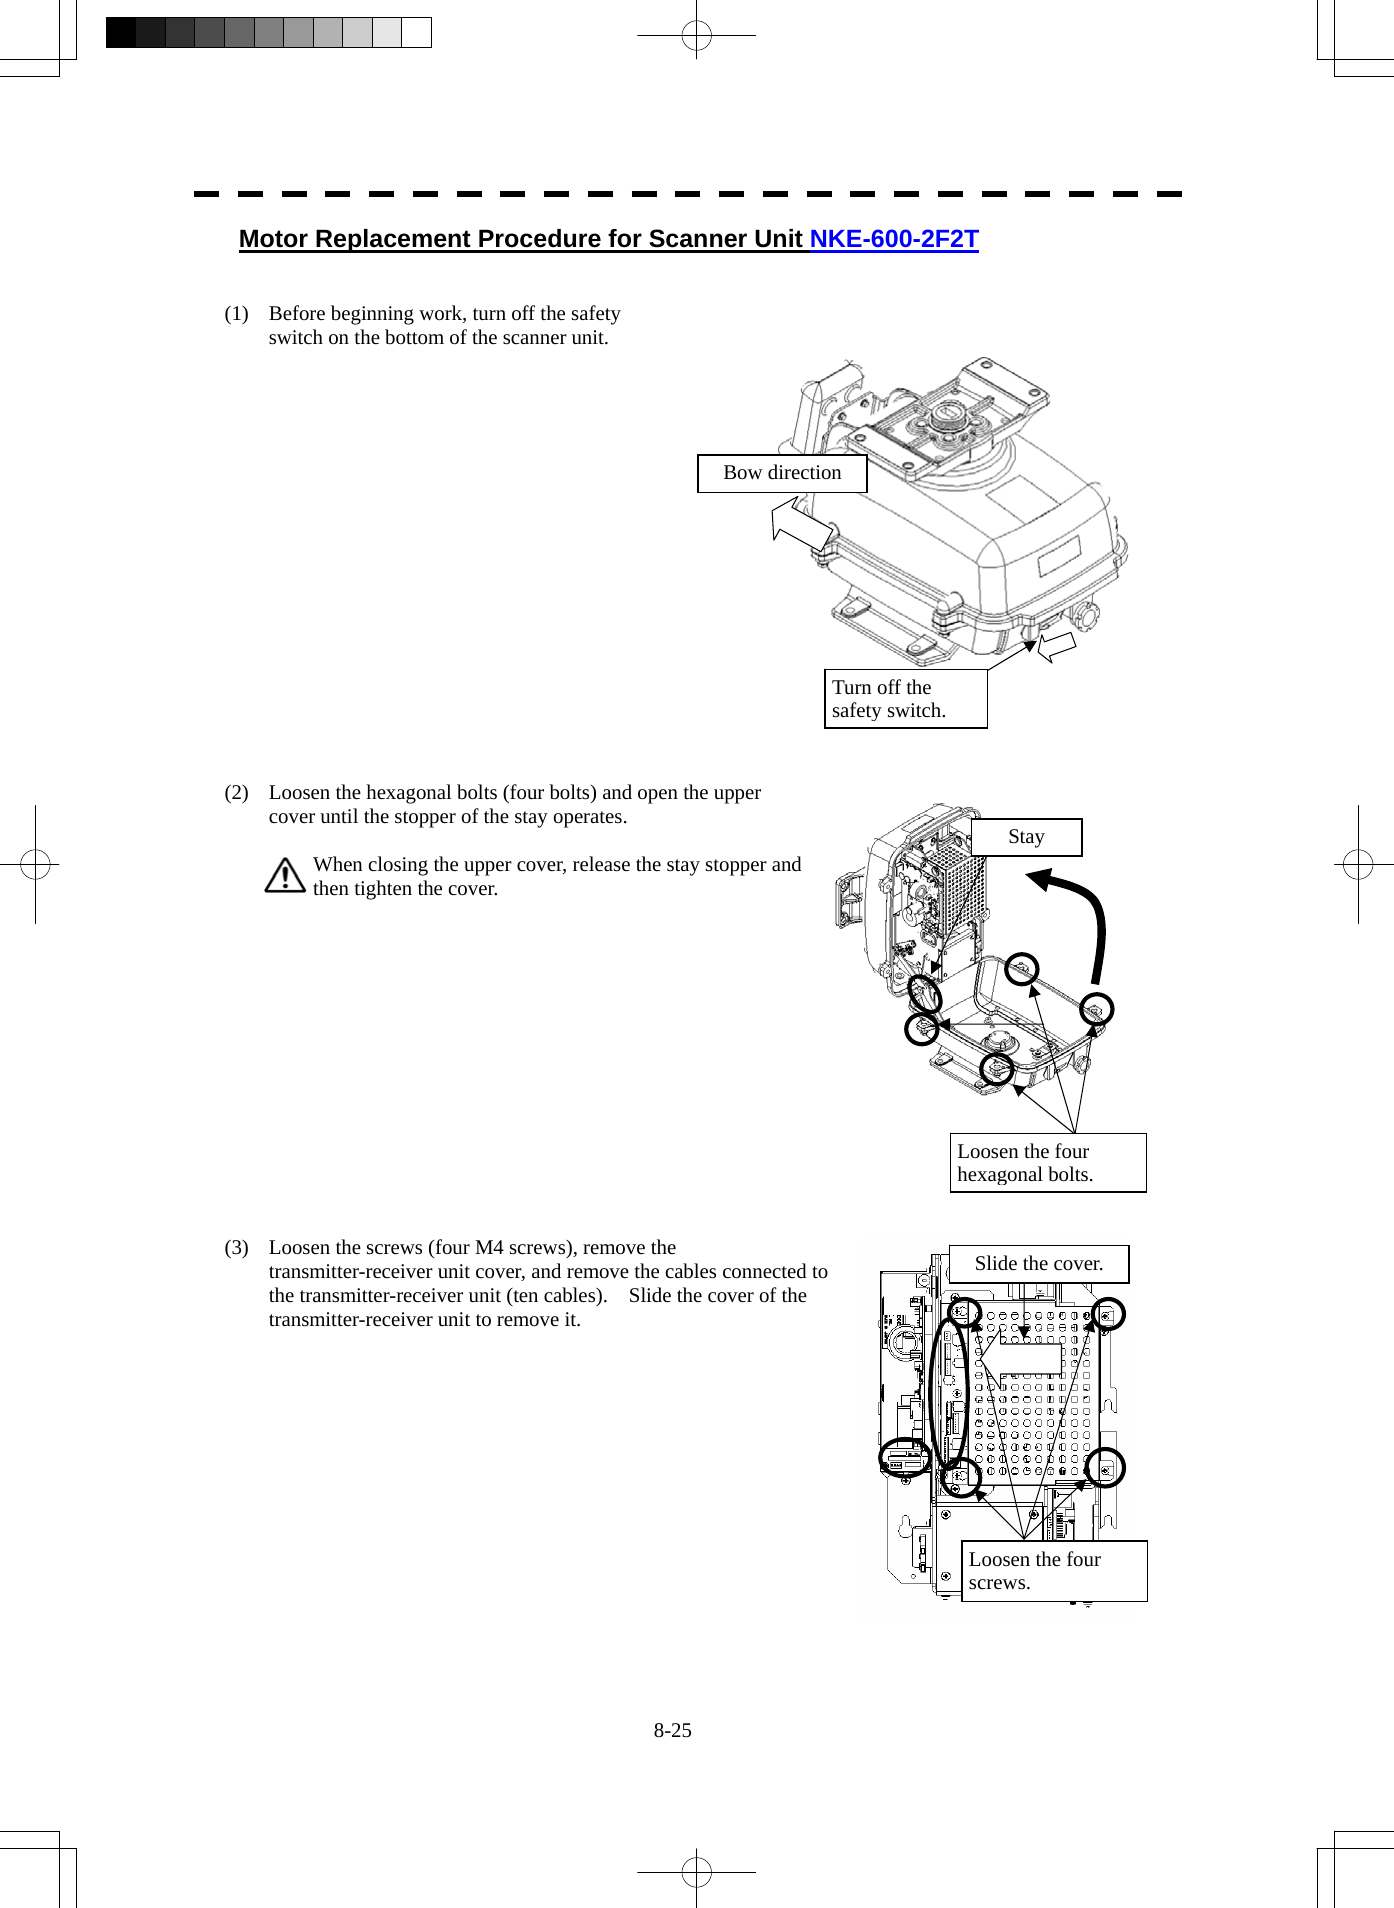  8-25 Motor Replacement Procedure for Scanner Unit NKE-600-2F2T   (1)  Before beginning work, turn off the safety switch on the bottom of the scanner unit.                   (2)  Loosen the hexagonal bolts (four bolts) and open the upper cover until the stopper of the stay operates.  When closing the upper cover, release the stay stopper and then tighten the cover.               (3)  Loosen the screws (four M4 screws), remove the transmitter-receiver unit cover, and remove the cables connected to the transmitter-receiver unit (ten cables).    Slide the cover of the transmitter-receiver unit to remove it. StayLoosen the four hexagonal bolts.Bow direction Turn off the safety switch. Slide the cover.Loosen the four screws. 